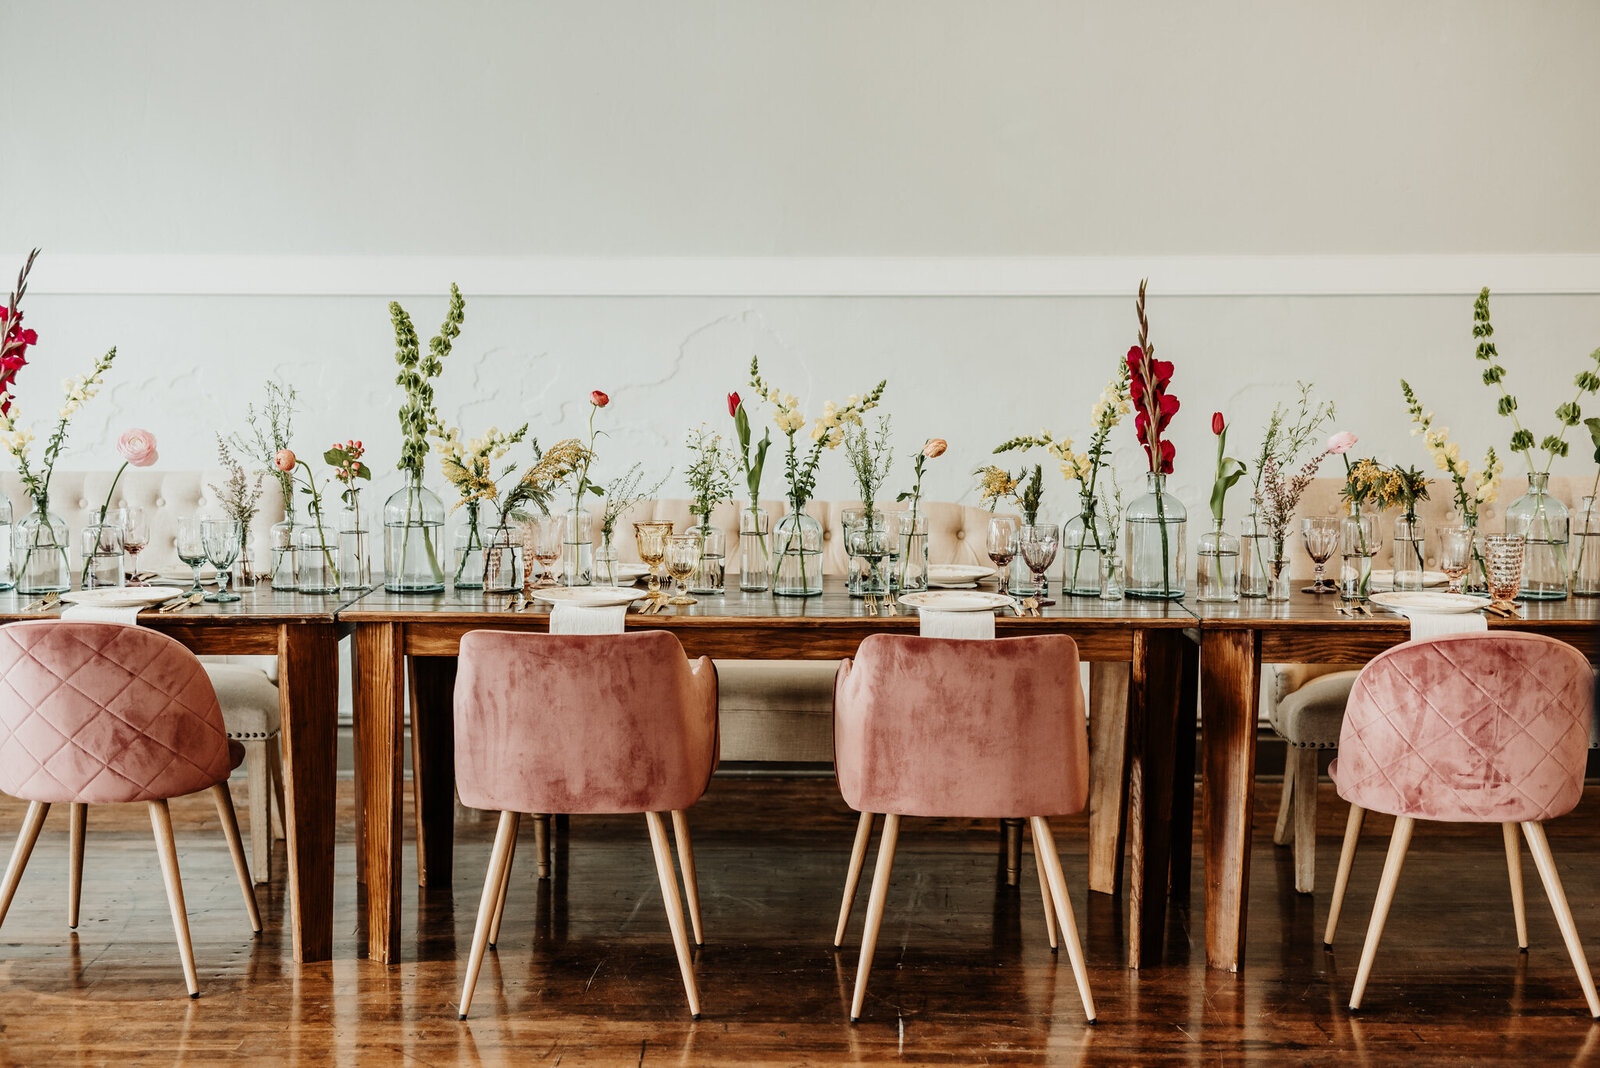 Tablescape with vintage vibes, glass vases and flowers.